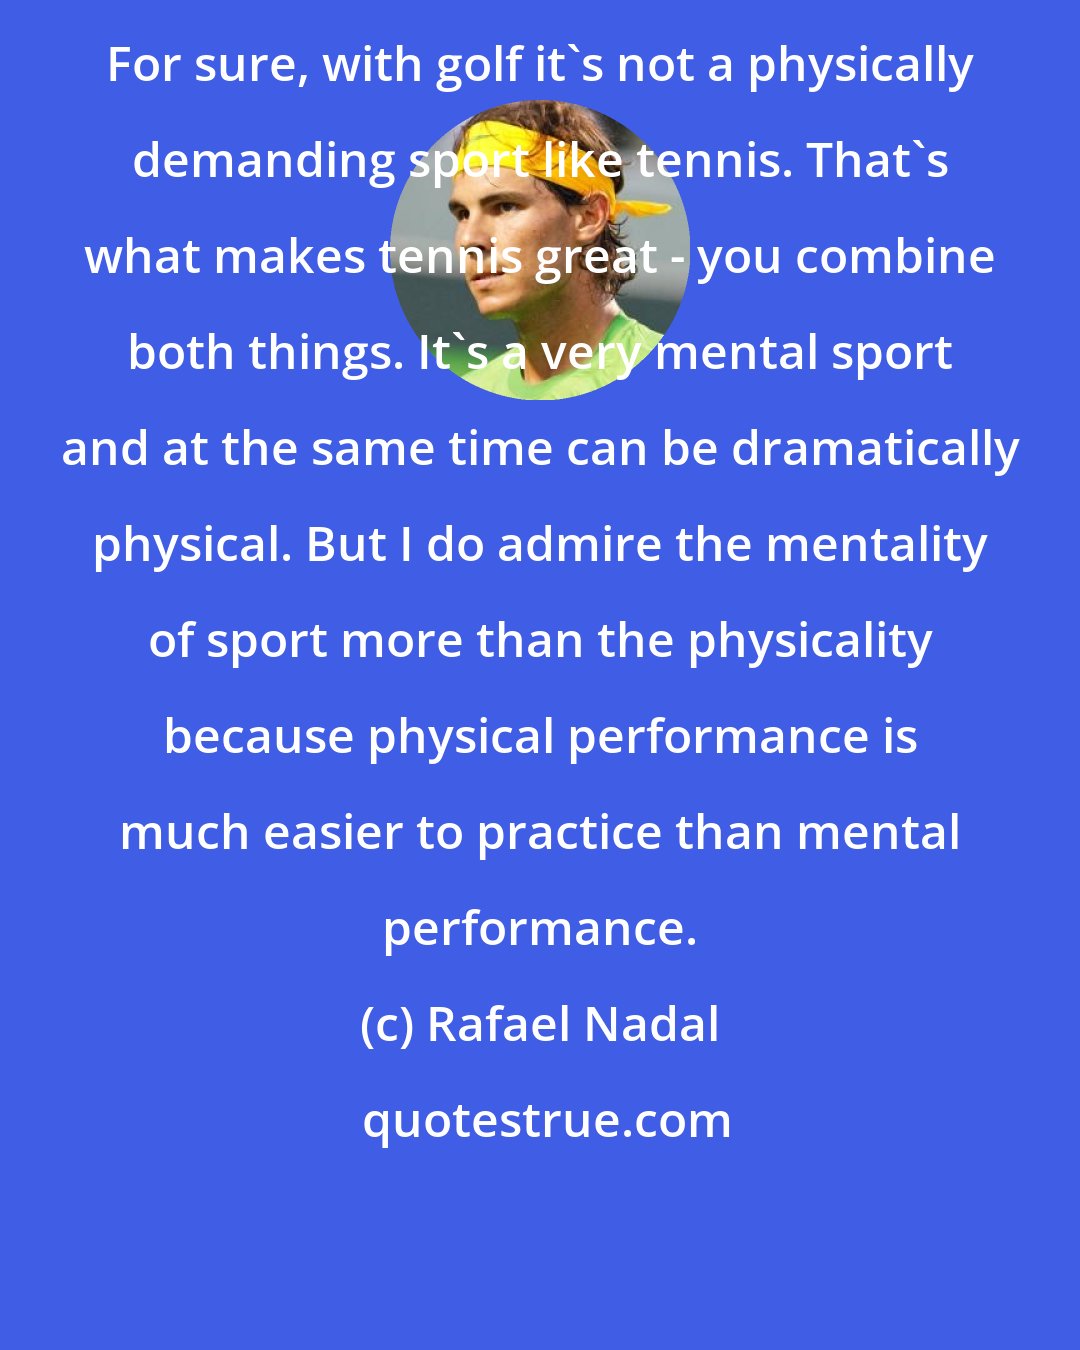 Rafael Nadal: For sure, with golf it's not a physically demanding sport like tennis. That's what makes tennis great - you combine both things. It's a very mental sport and at the same time can be dramatically physical. But I do admire the mentality of sport more than the physicality because physical performance is much easier to practice than mental performance.